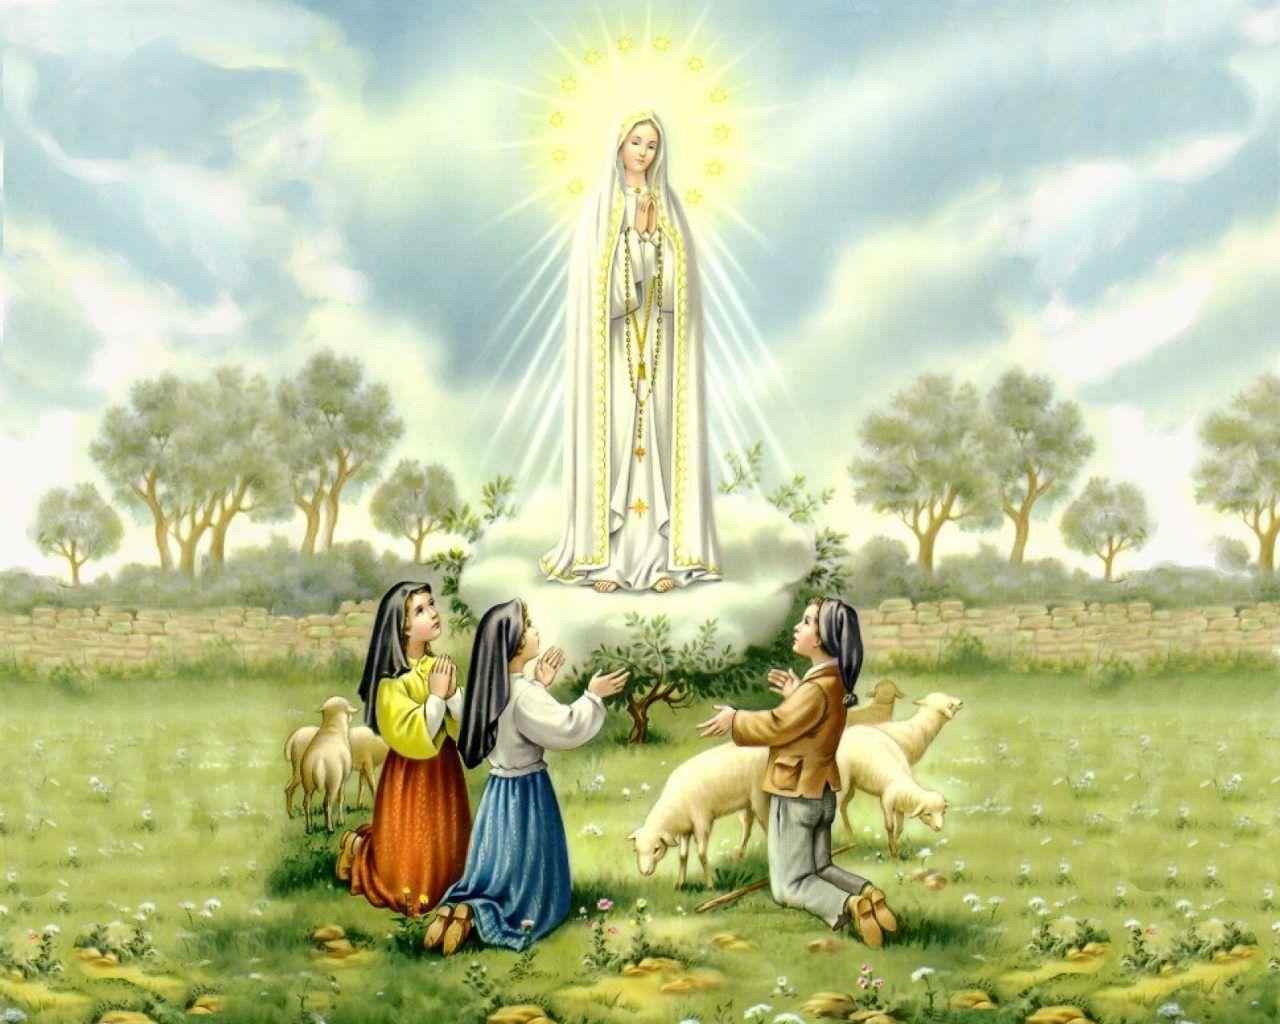 710 Our Lady Of Fatima Stock Photos Pictures  RoyaltyFree Images   iStock  Virgin mary Virgin mary fatima Our lady of guadalupe